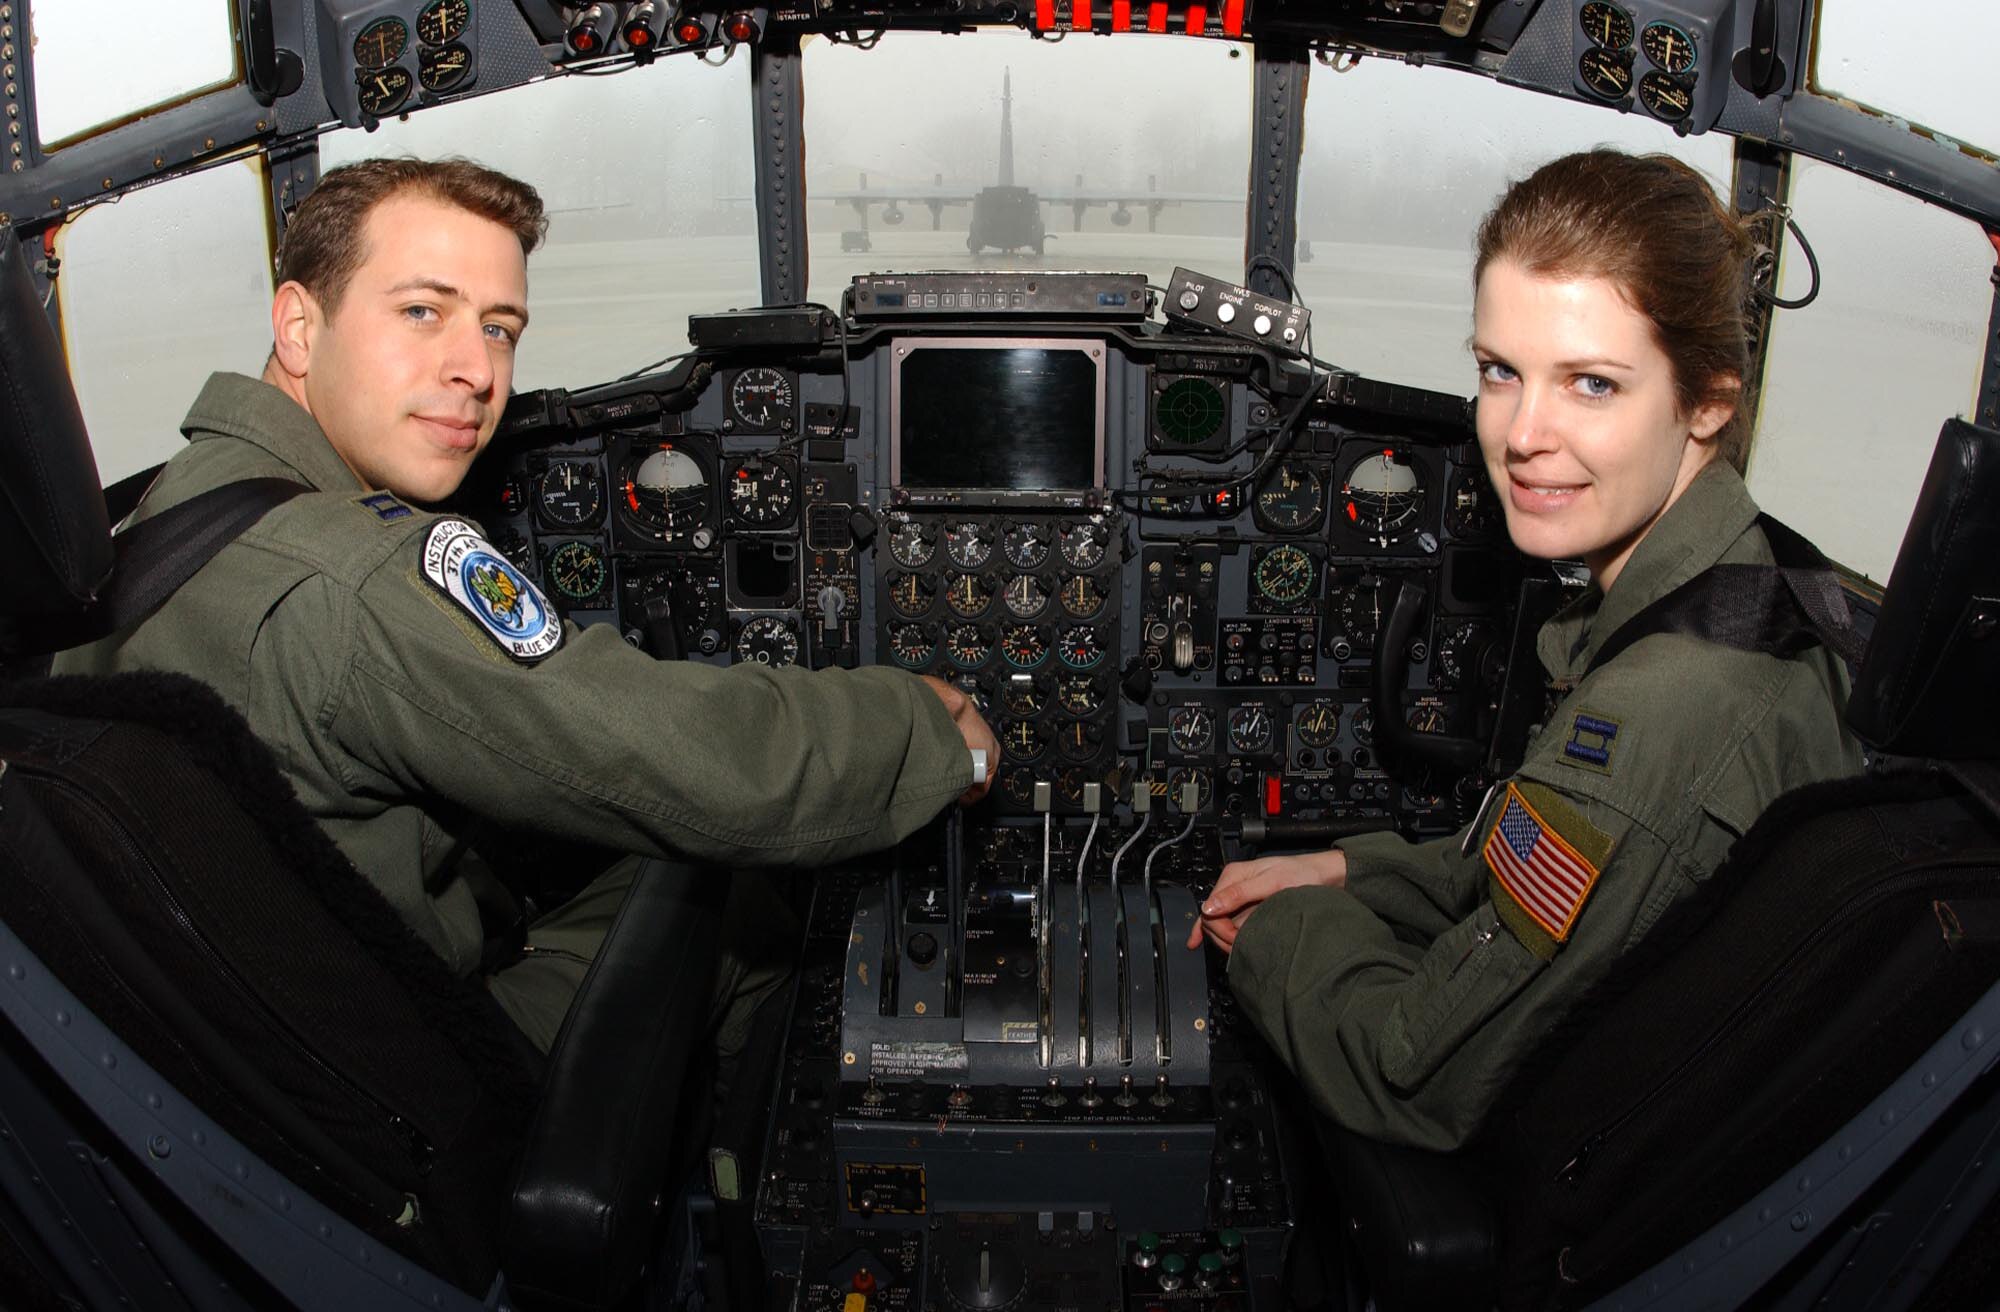 Since February 2003, Captains Dan and Sarah Santoro, have spent more than 1,070 days deployed together throughout Southwest Asia in support of the war on terrorism. The Santoro couple are pilots with 37th Airlift Squadron at Ramstein Air Base, Germany. (U.S. Air Force photo/Senior Airman Erin Peterson)